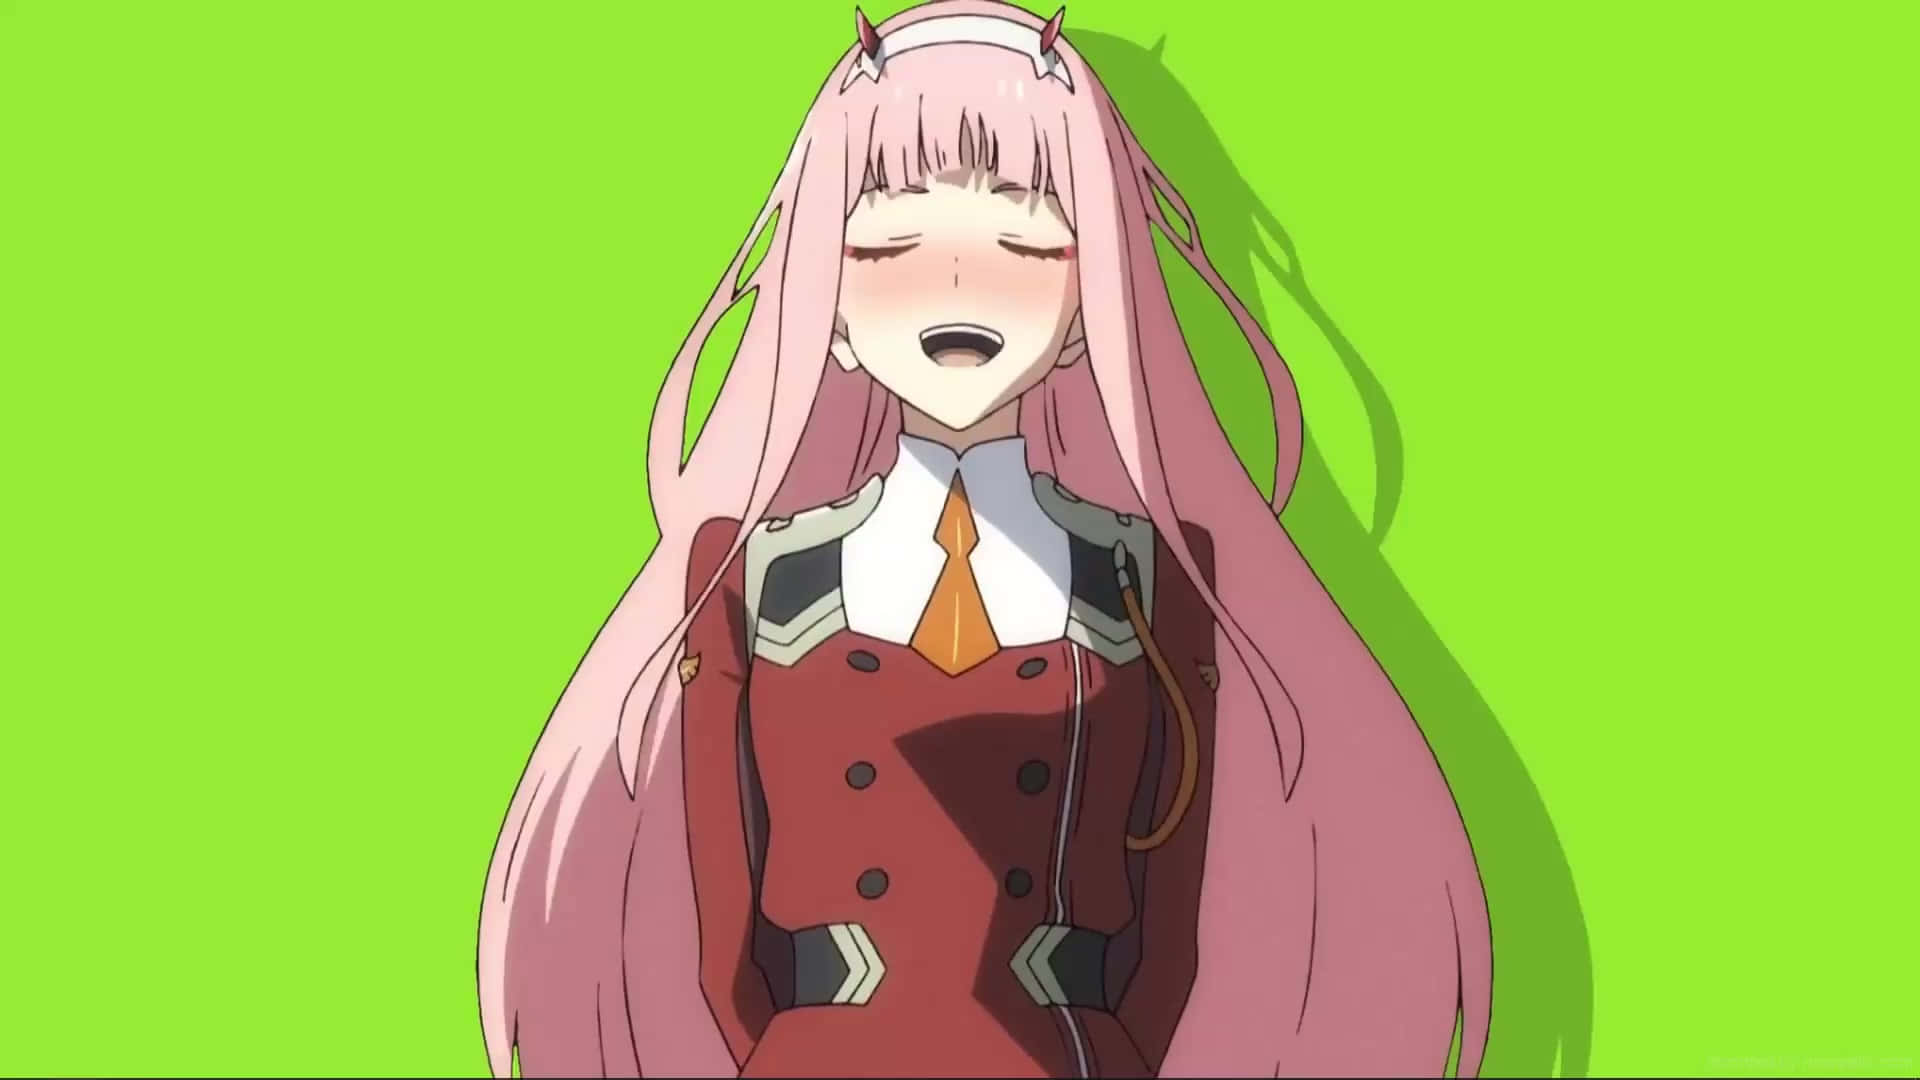 "Elevate your journey with Zero Two!"